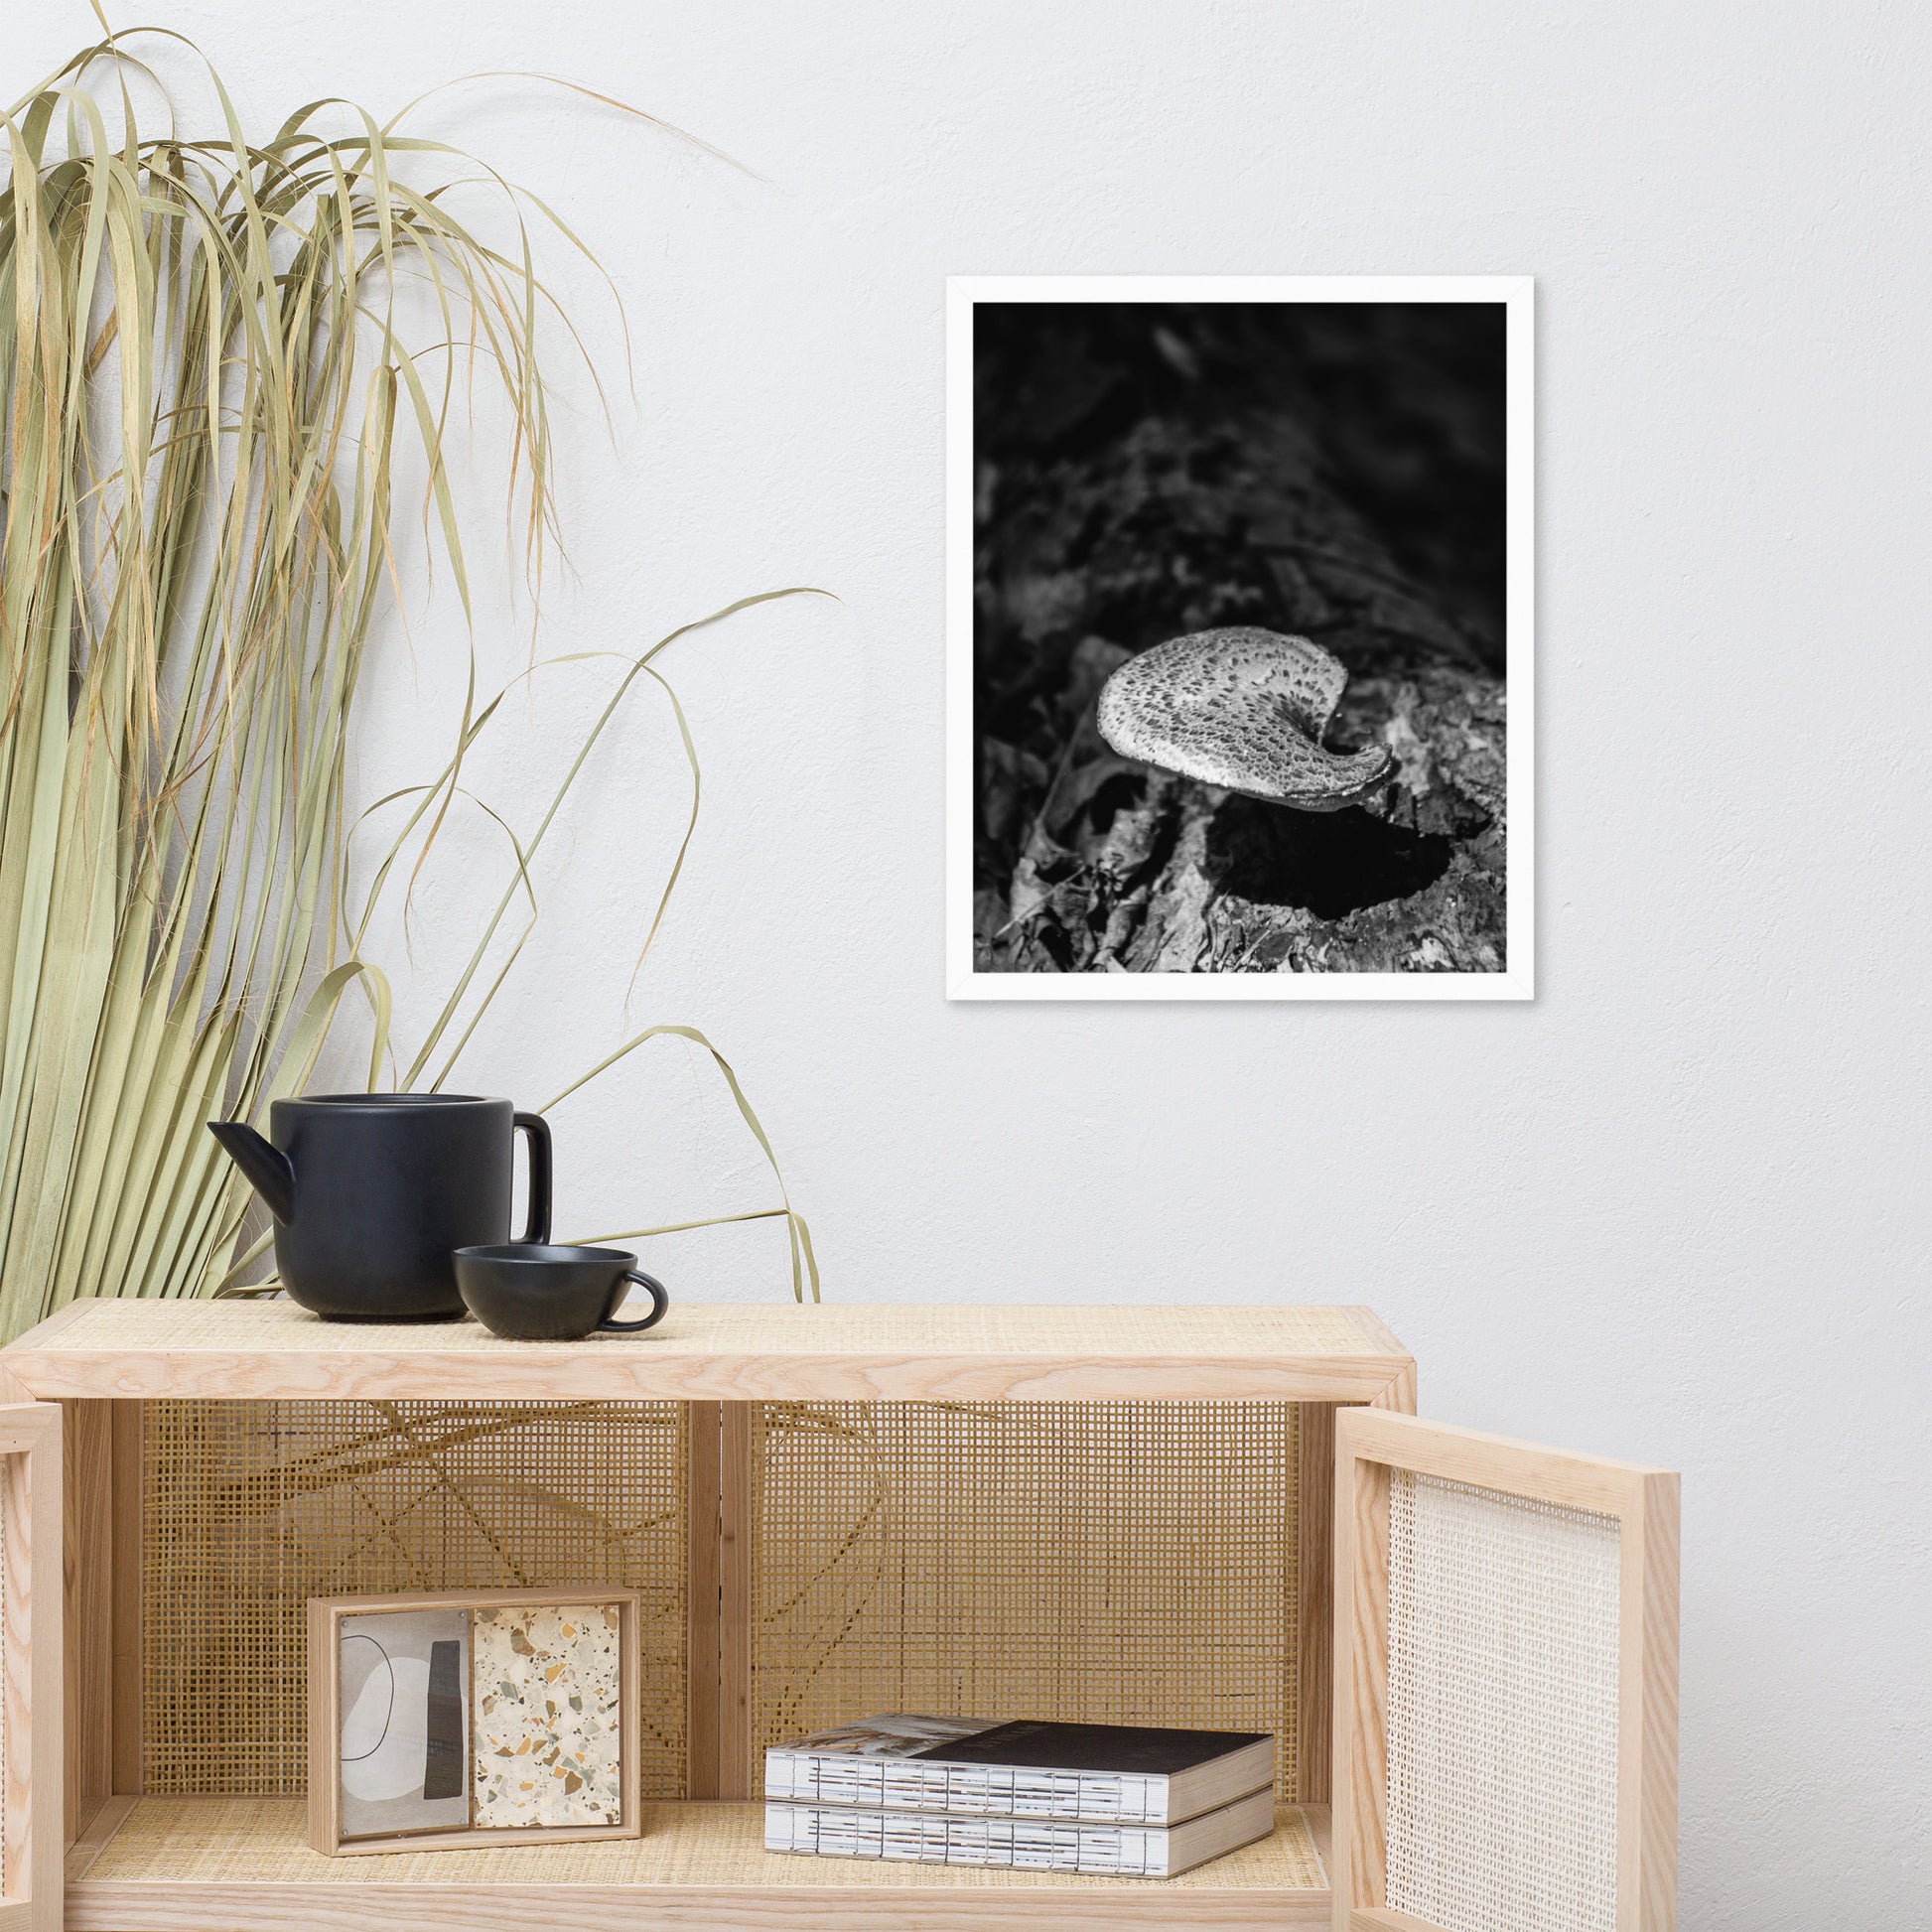 Rustic Country Wall Decor: Mushroom on Log in Black and White Botanical Nature Photo Framed Wall Art Print